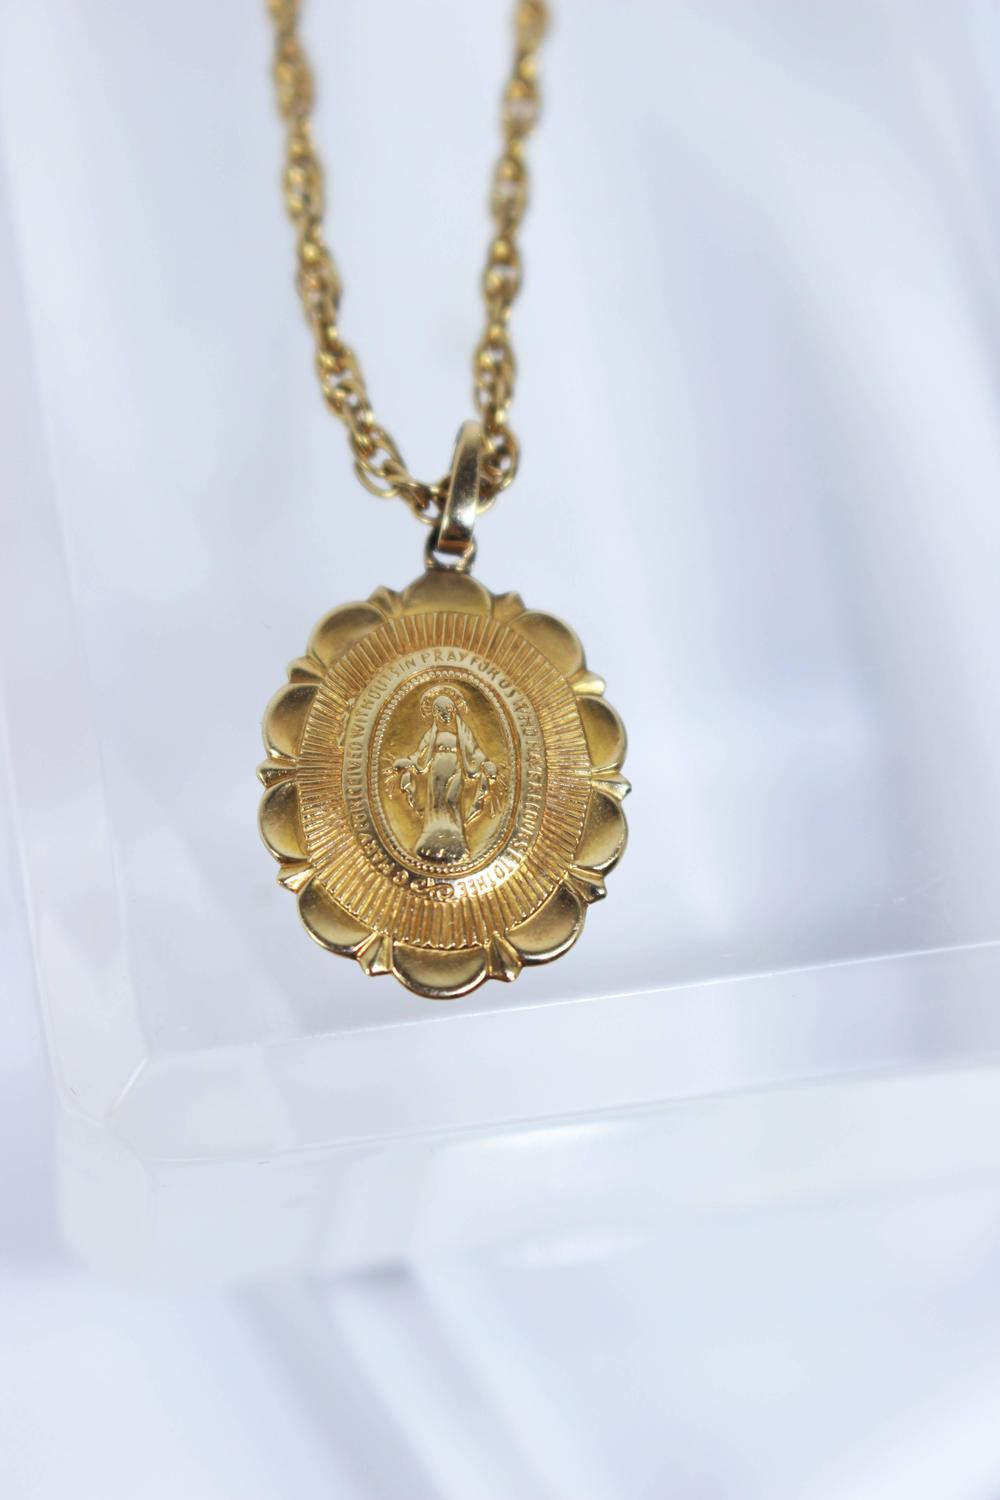 Virgin Mary Necklace
 Gold Filled Virgin Mary Pendant and Necklace For Sale at